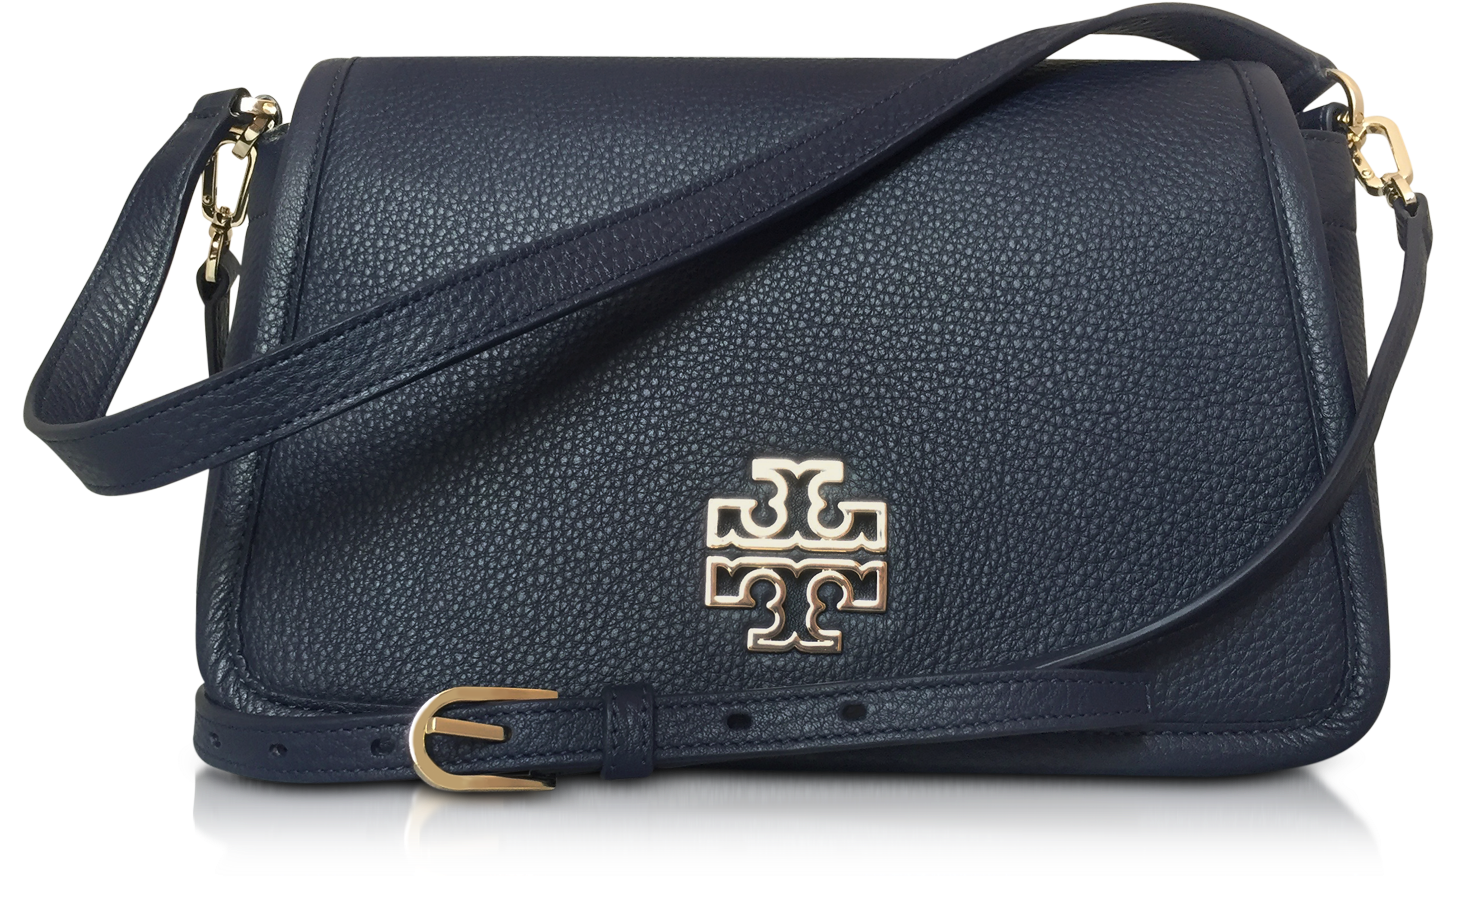 Tory Burch Britten Pebbled Leather Shoulder Bag at FORZIERI